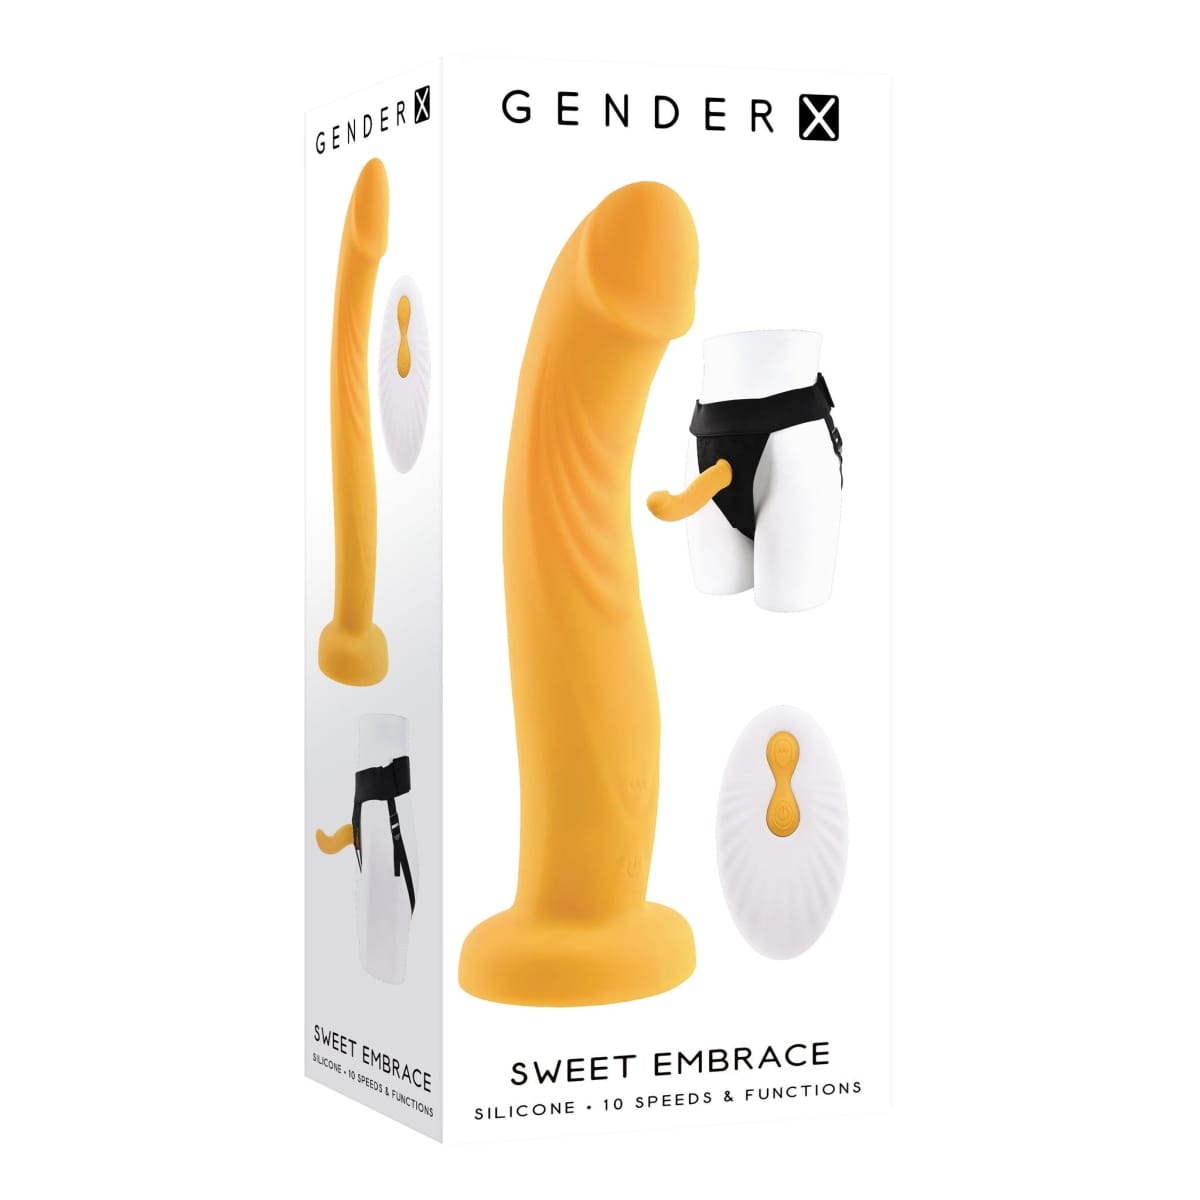 Gender X Sweet Embrace Intimates Adult Boutique